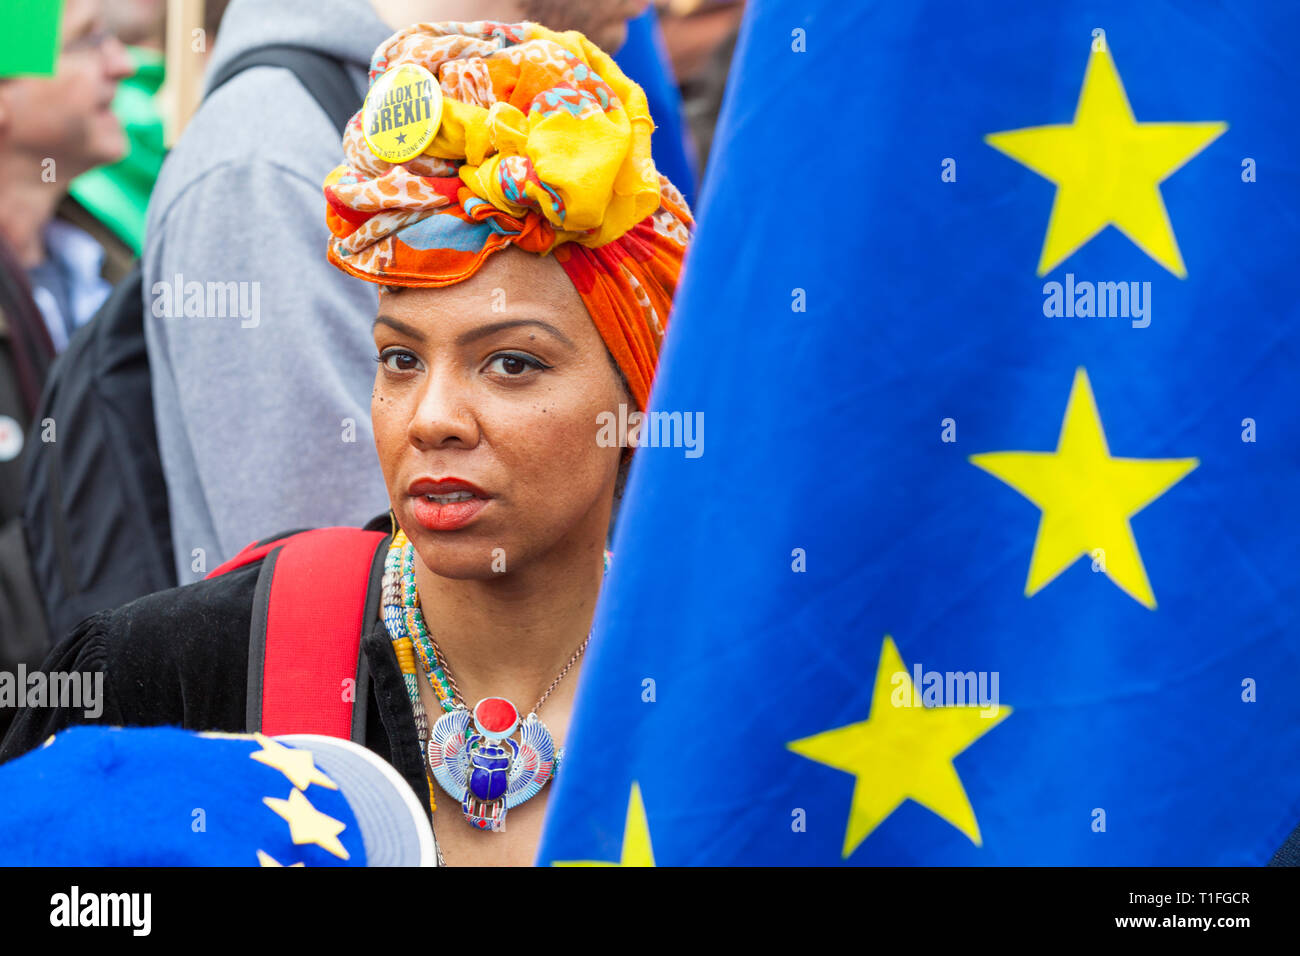 Peoples Vote March. Hundreds of thousands of pro-EU supporters attend a mass march to Westminster. A woman with colourful headscarf and eu flag. Stock Photo